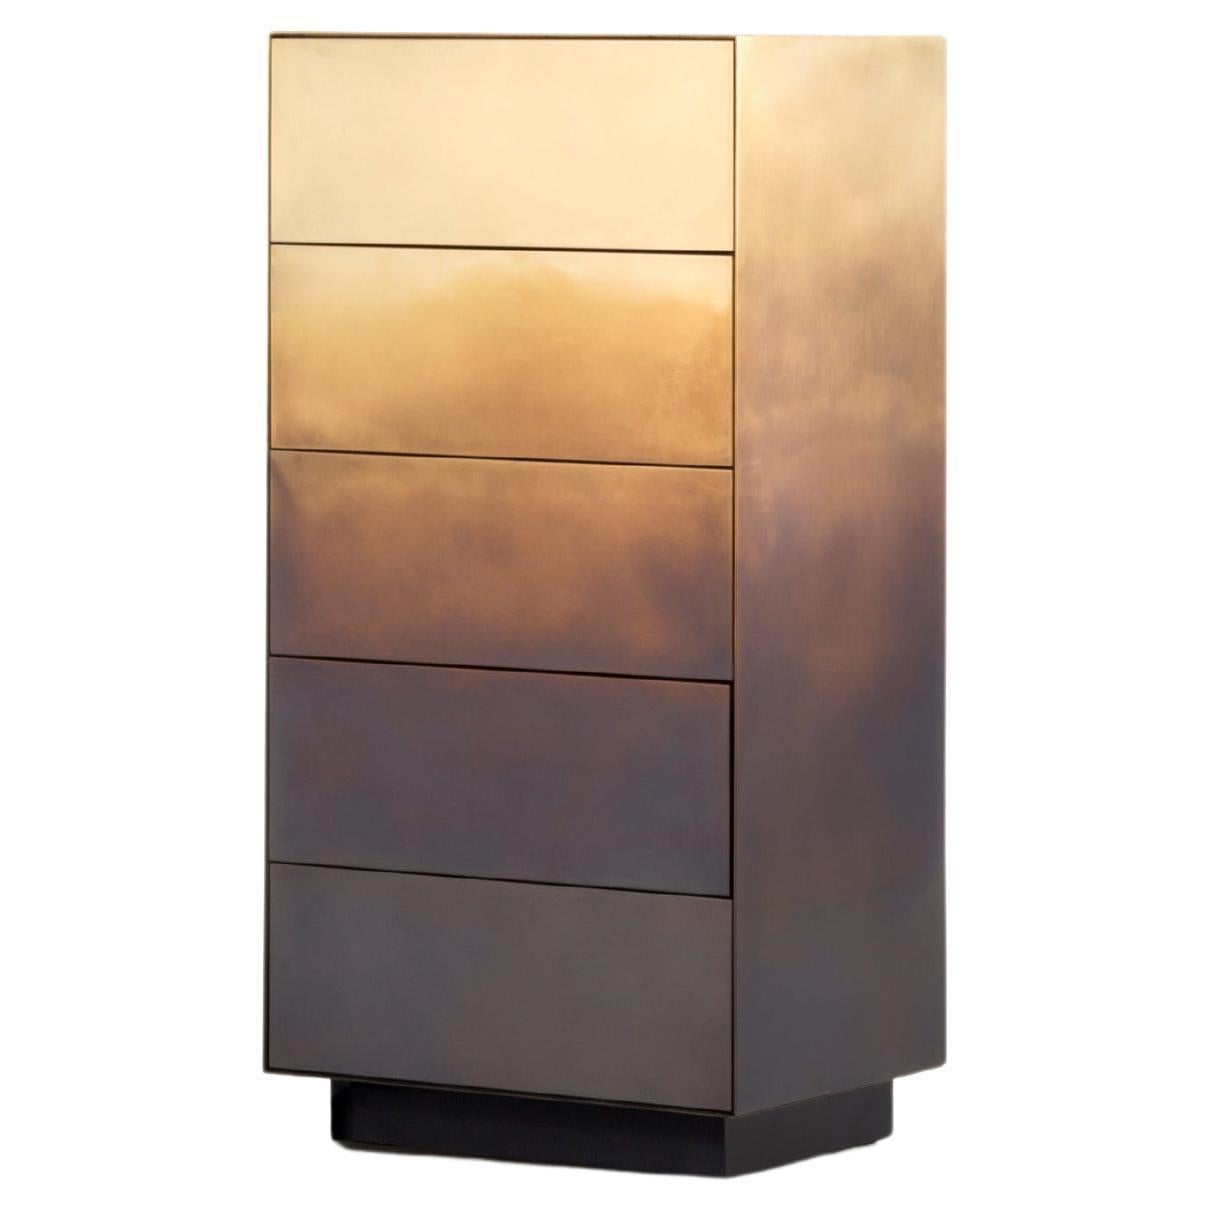 Marea Chest of Drawers by De Castelli